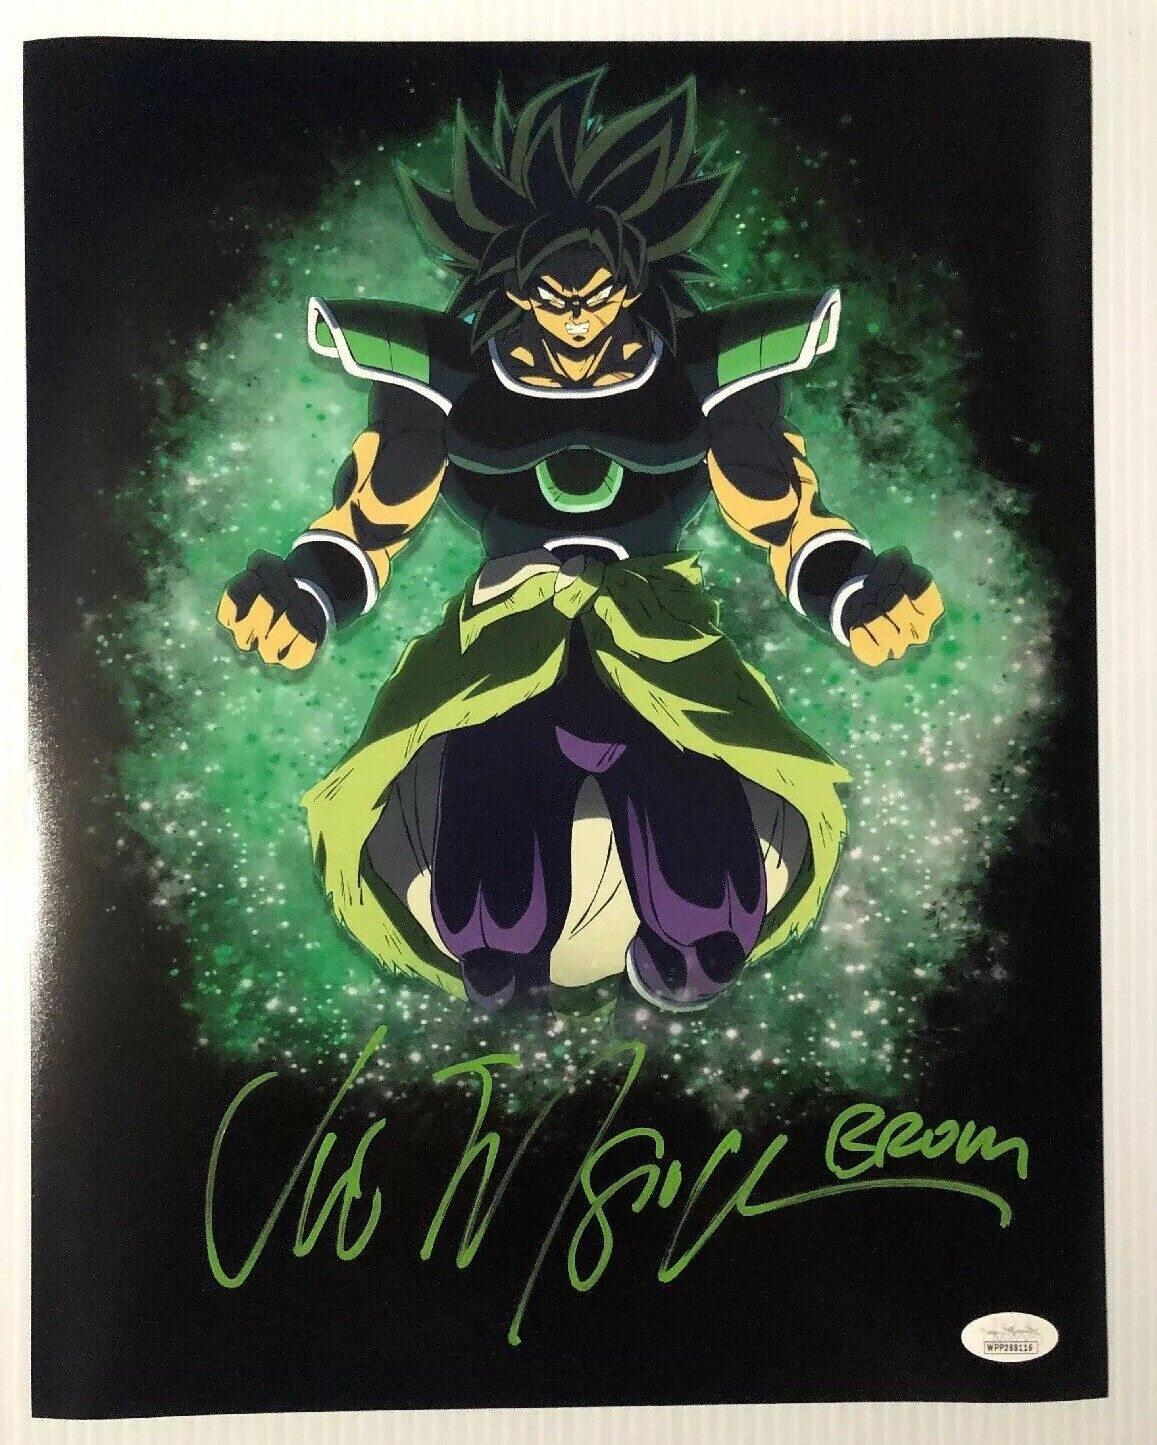 Vic Mignogna Signed Autographed 11x14 Photo Poster painting Dragon Ball Z Super Broly JSA COA 9